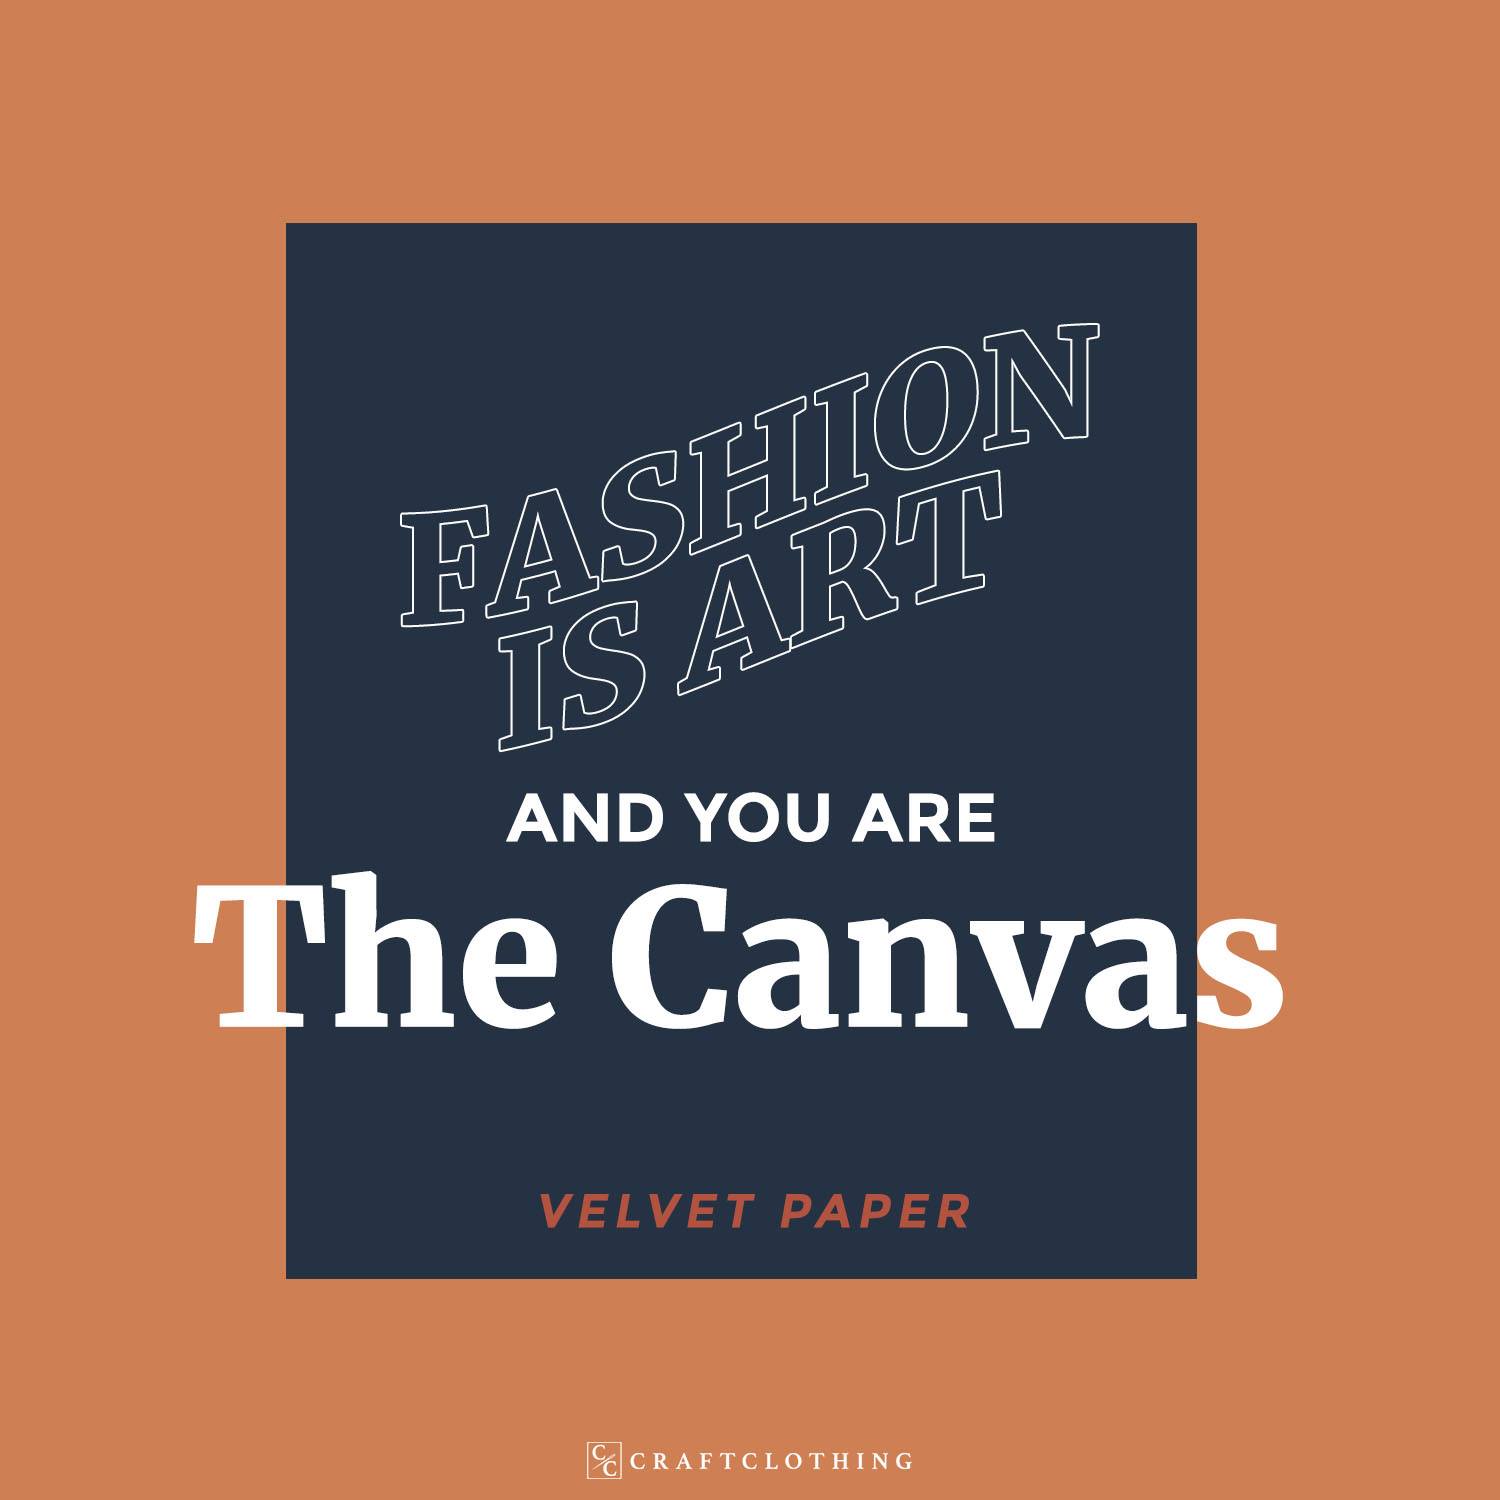 FASHION IS ART AND YOU ARE The Canvas